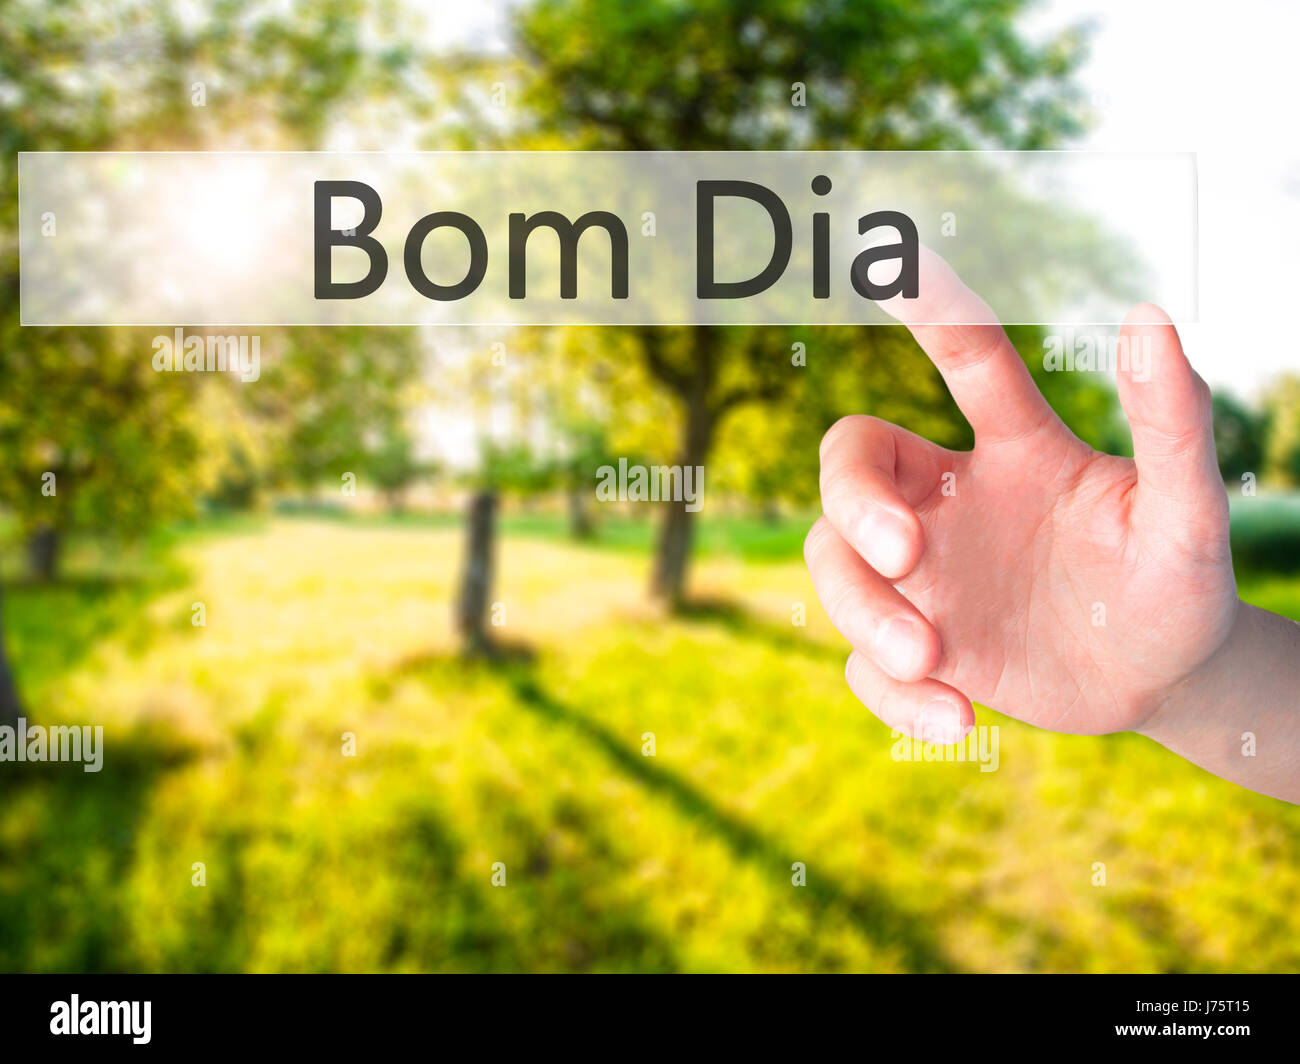 Bom Dia (In portuguese - Good Morning) - Hand pressing a button on blurred  background concept . Business, technology, internet concept. Stock Photo  Stock Photo - Alamy